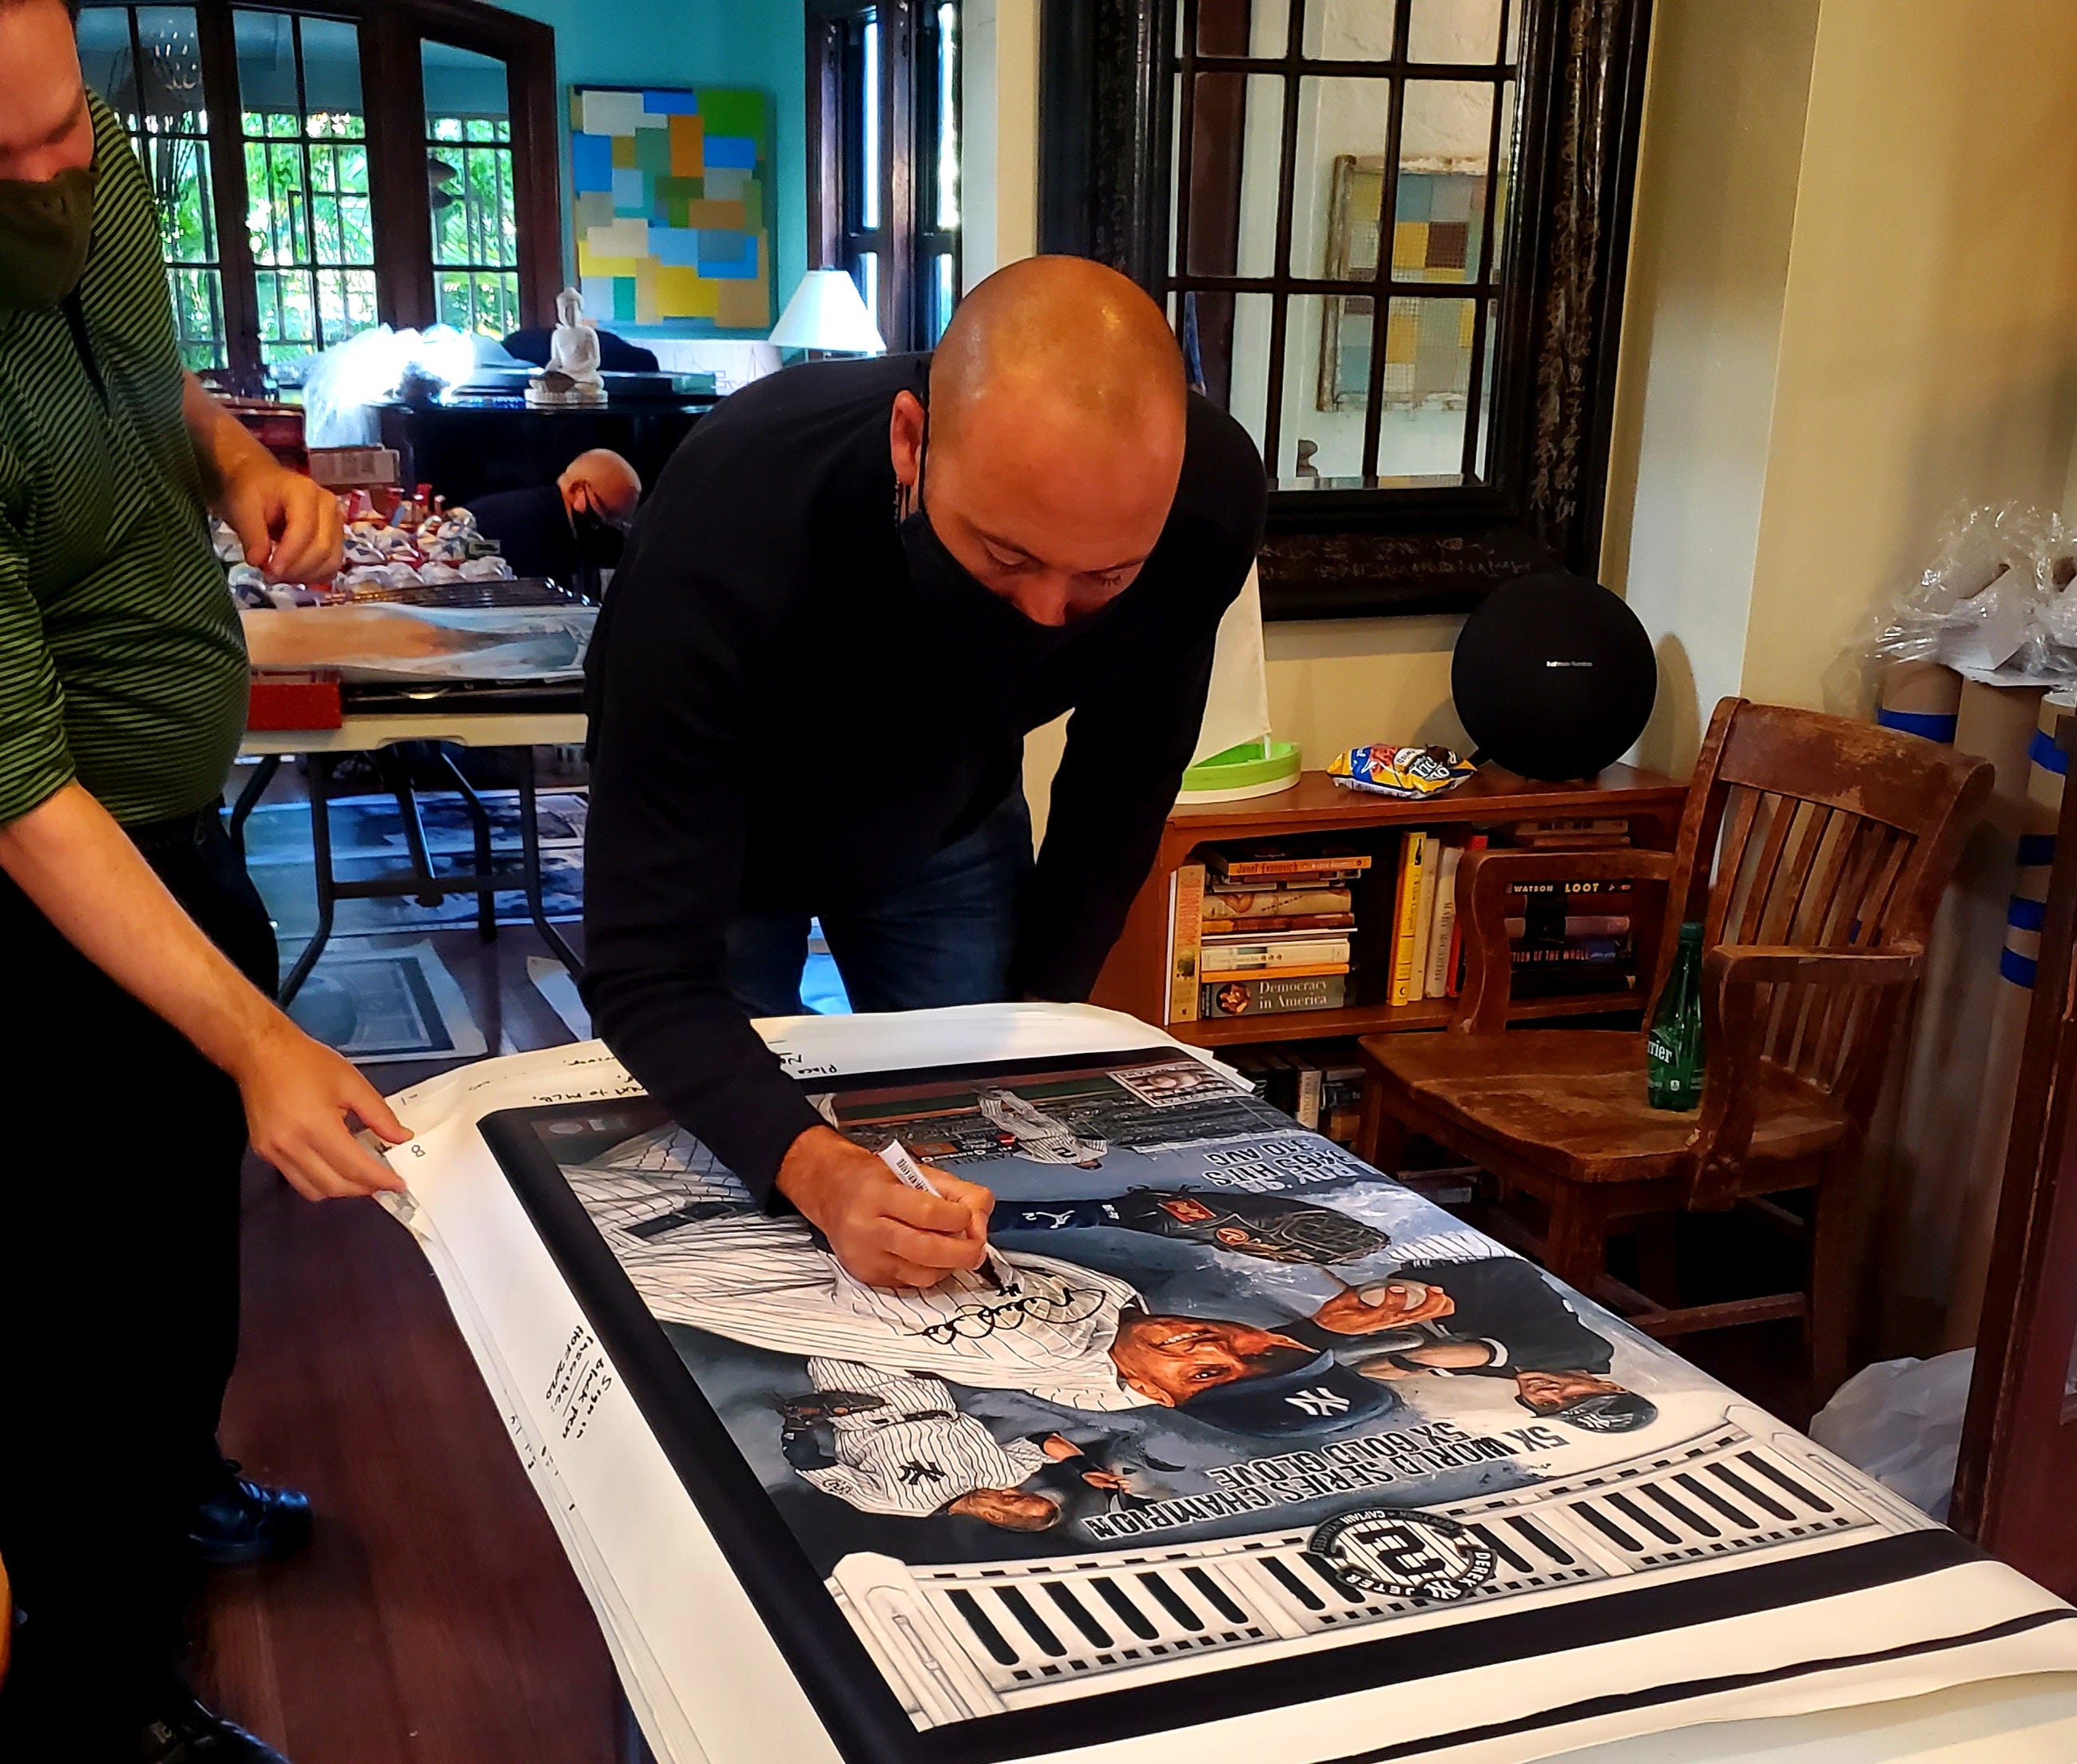 Derek Jeter 'One For The Ages' Autographed Limited Edition of 42 Framed 24  x 36 Canvas Giclee (Justyn Farano)